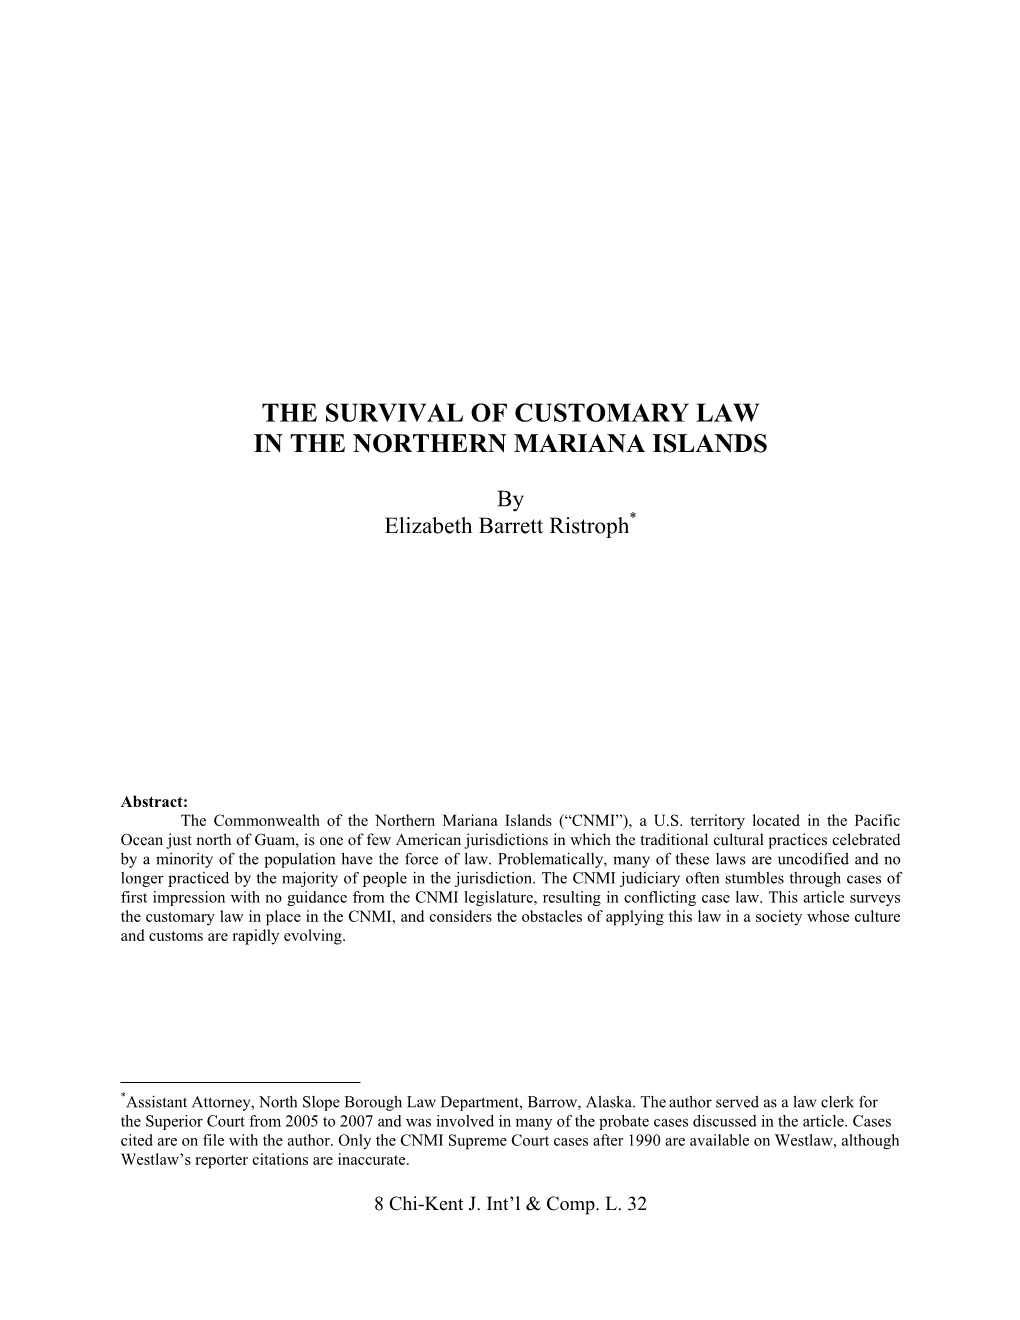 The Survival of Customary Law in the Northern Mariana Islands